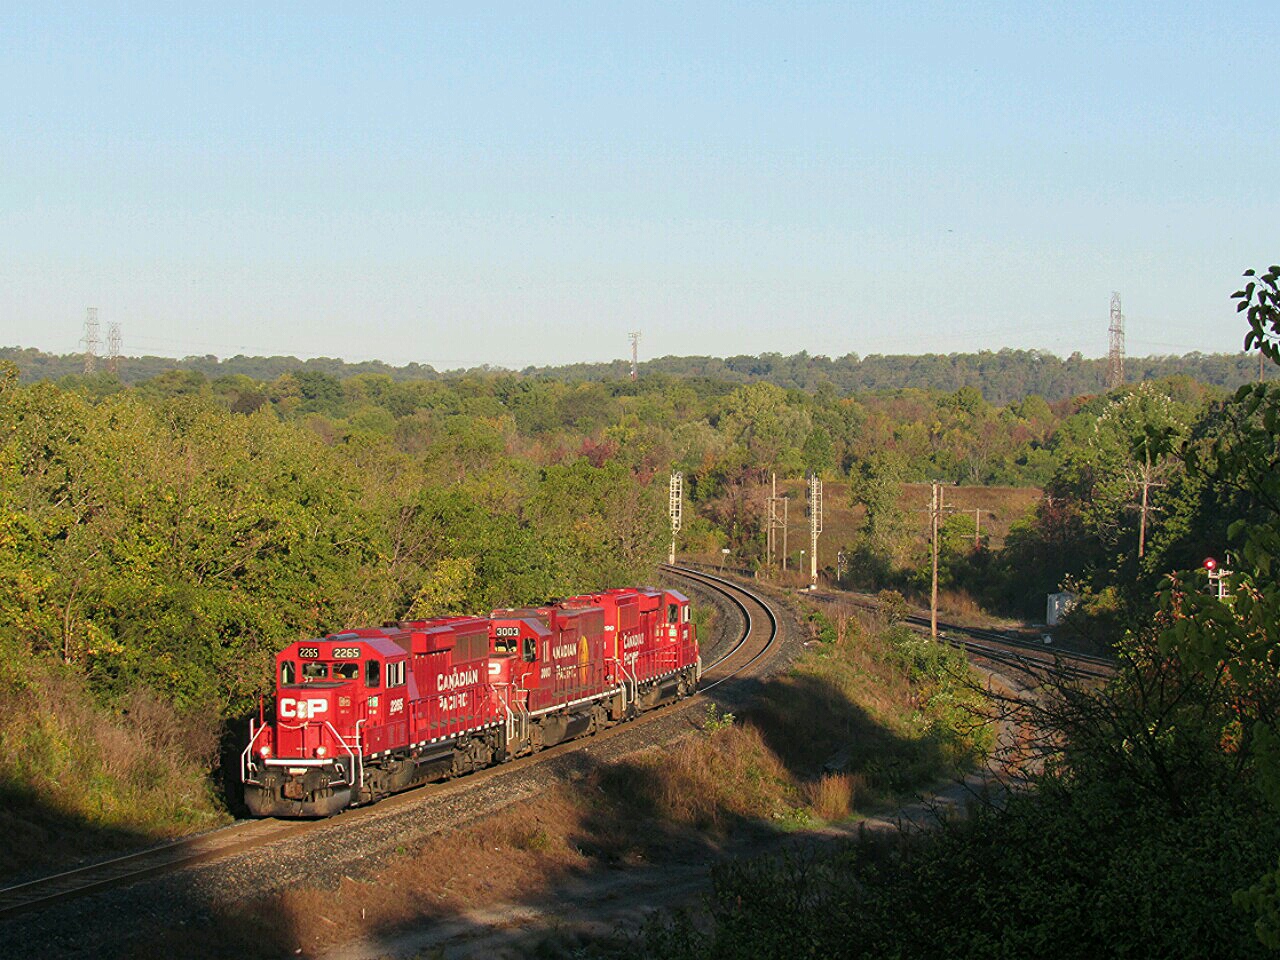 CP 2265 GP20C-ECO leads GP38-2 3003, and fellow GP20C-ECO 2290, down the Niagara Escarpment, heading into Kinnear Yard. CP 246 south, was right behind him, so 2265 must clear the main track, so 246 could squeeze into Kinnear. A pretty morning sky and fall colours made for a nice background.